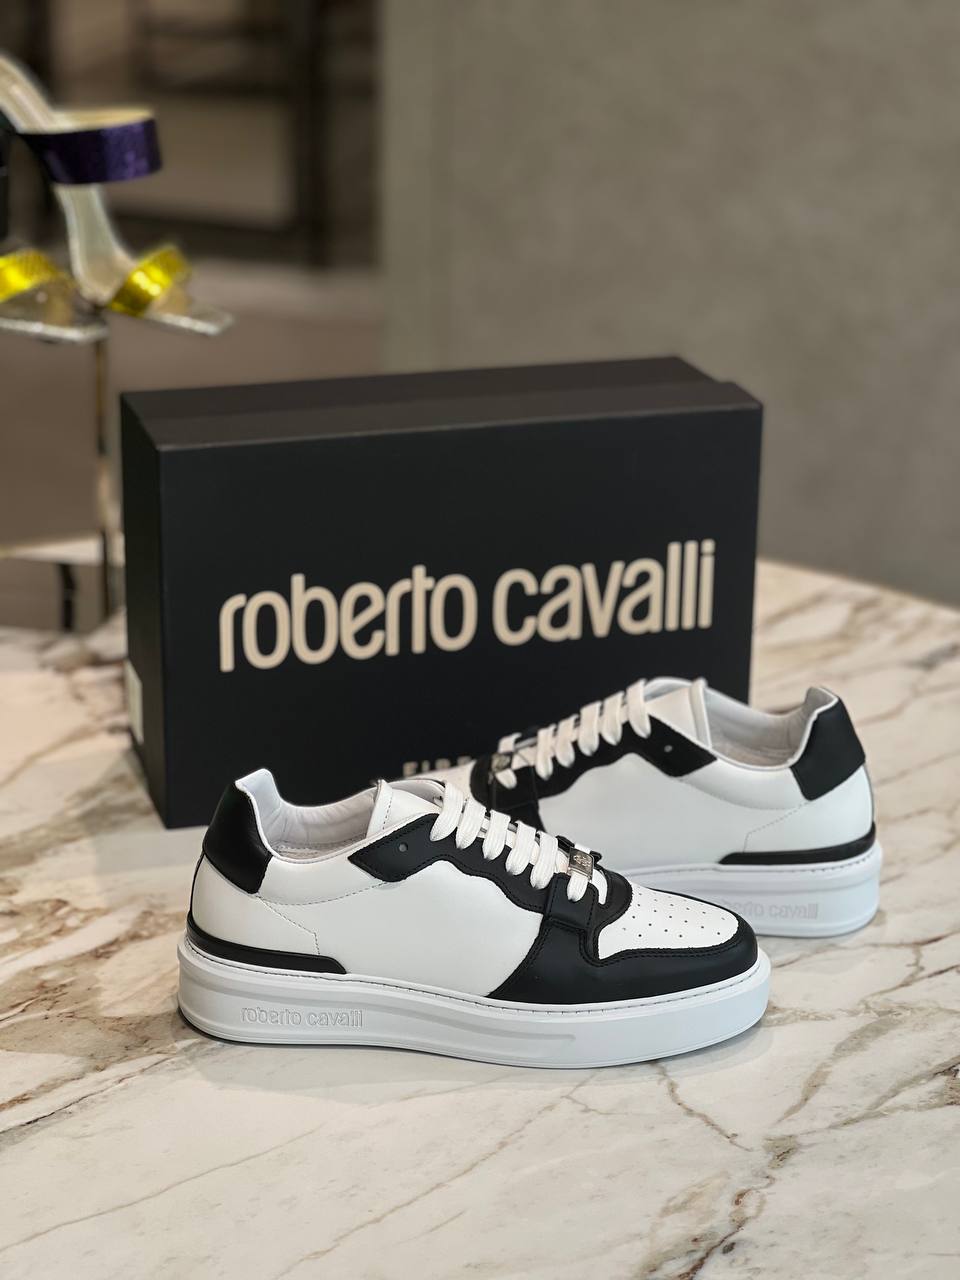 Roberto Cavalli Outlets 6151